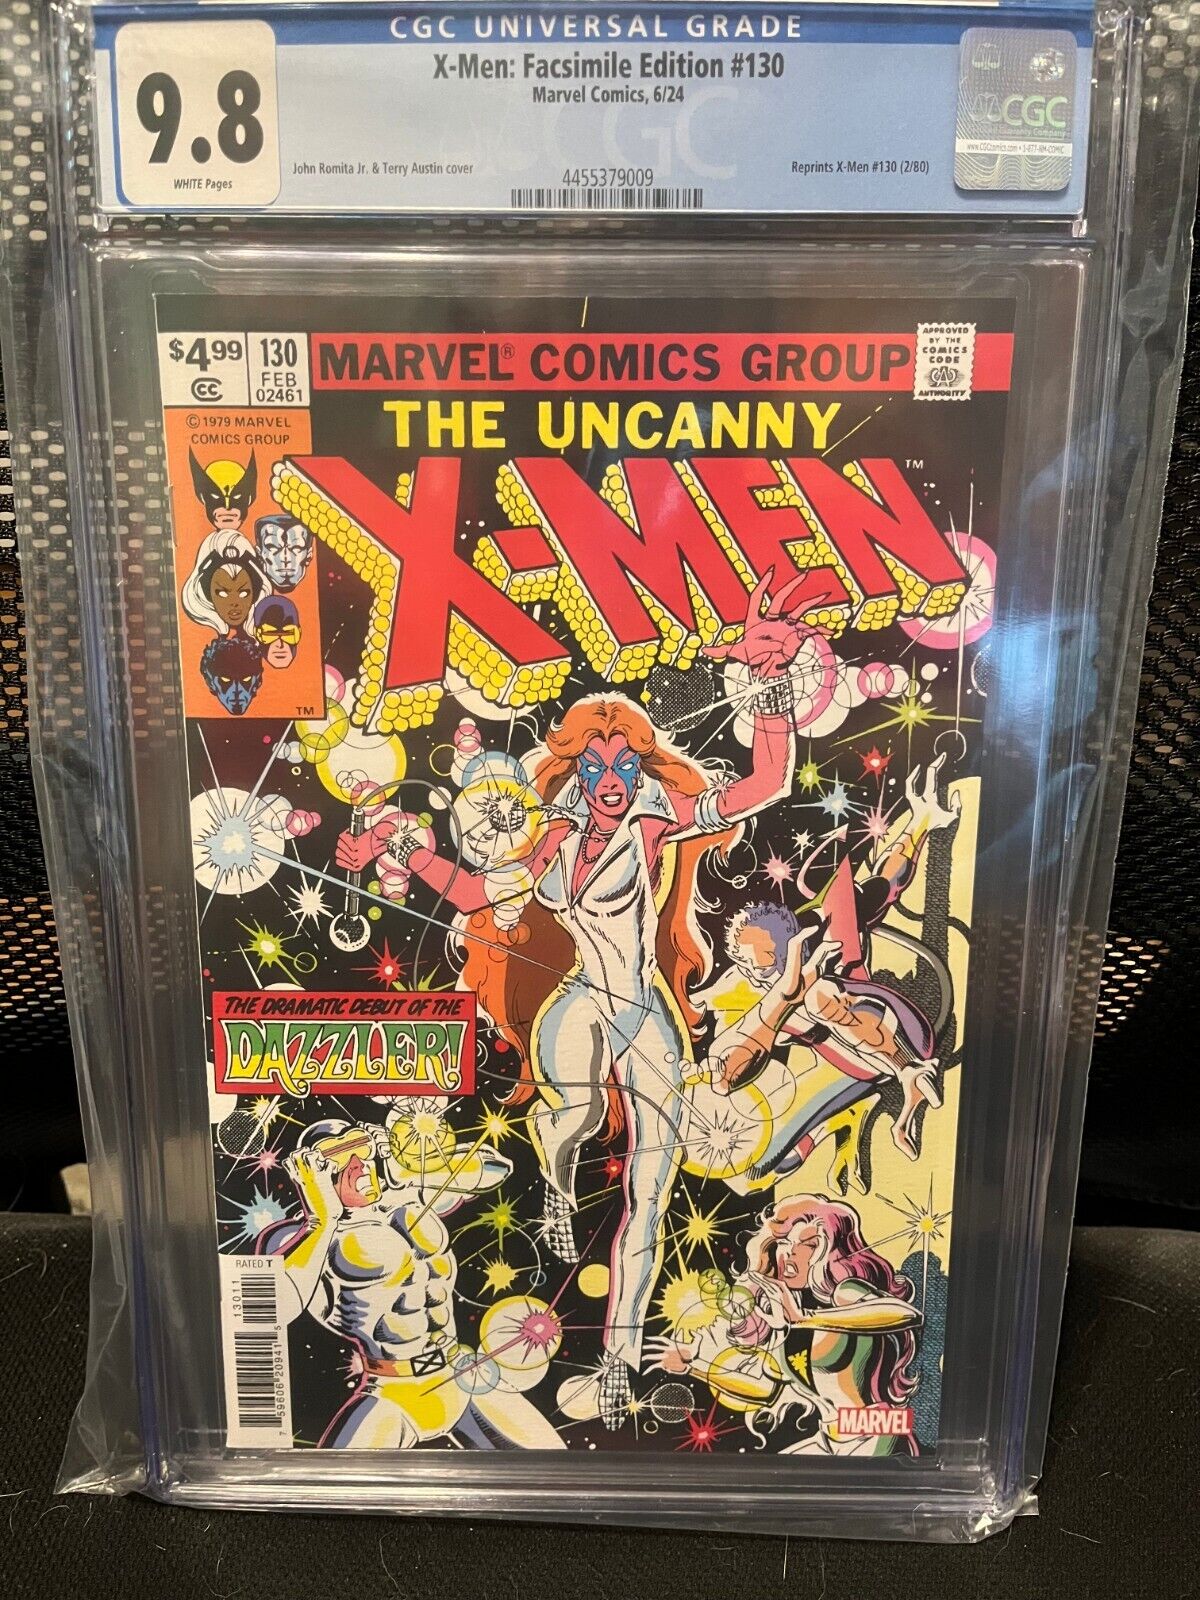 The Uncanny X-Men #129 CGC 9.8 NM+ NEWSSTAND 1st Kitty Pryde & Emma Frost (1980)